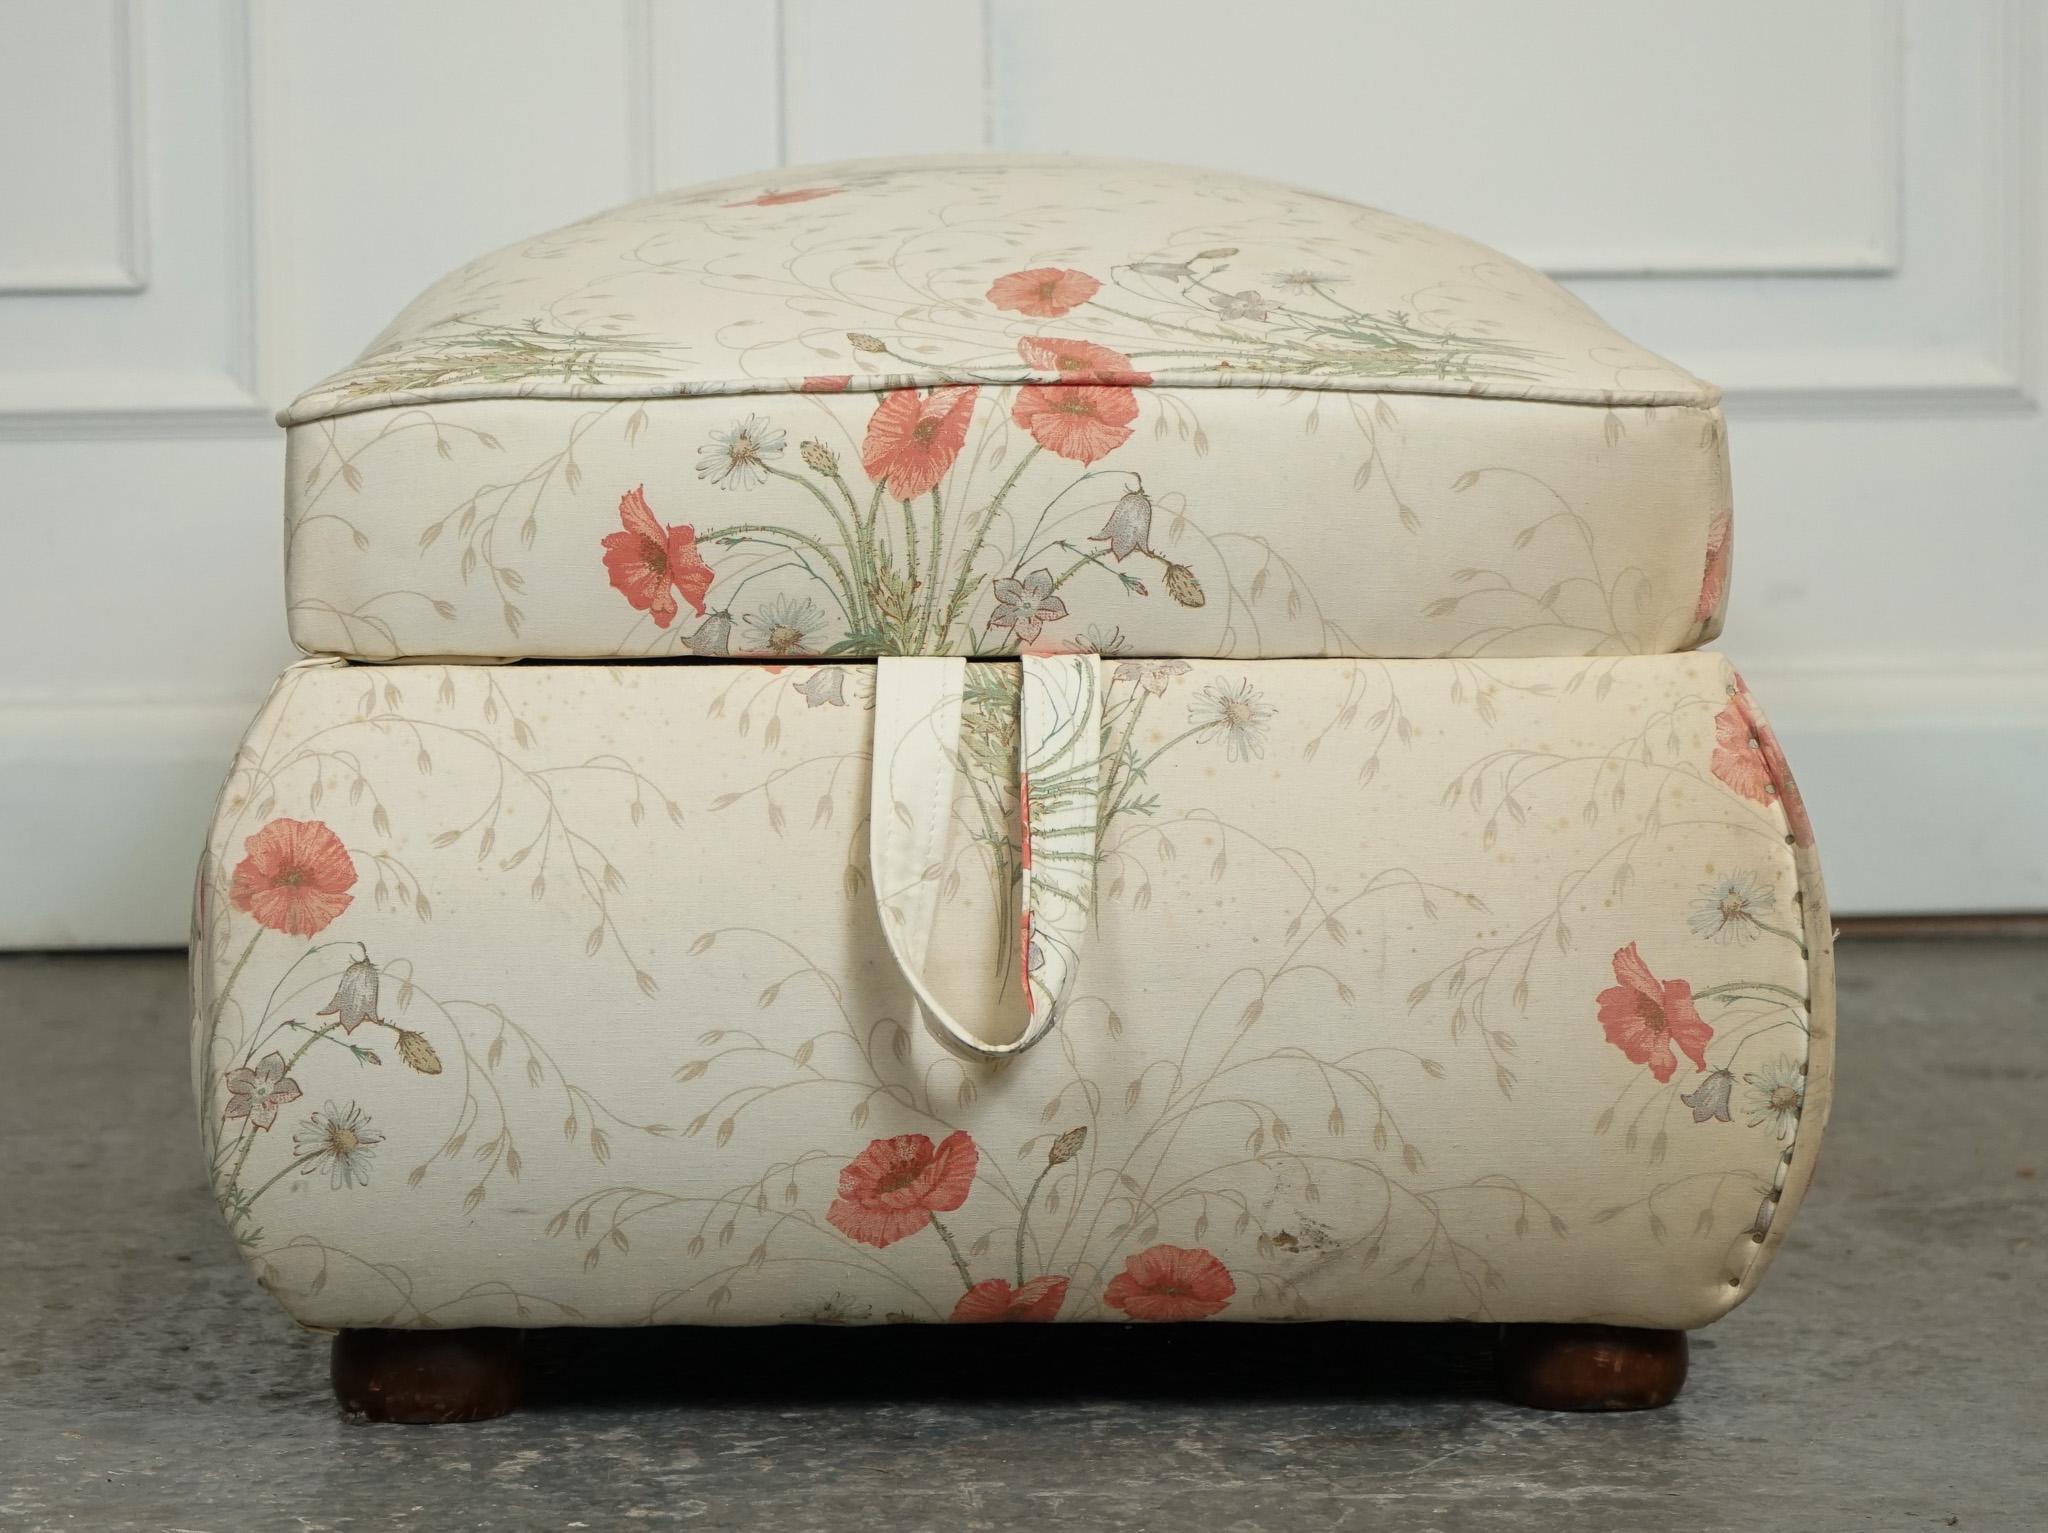 LARGE ANTIQUE VICTORIAN POPPY FLOWER PATTERN FABRiC OTTOMAN CHEST TRUNK  J1 For Sale 5